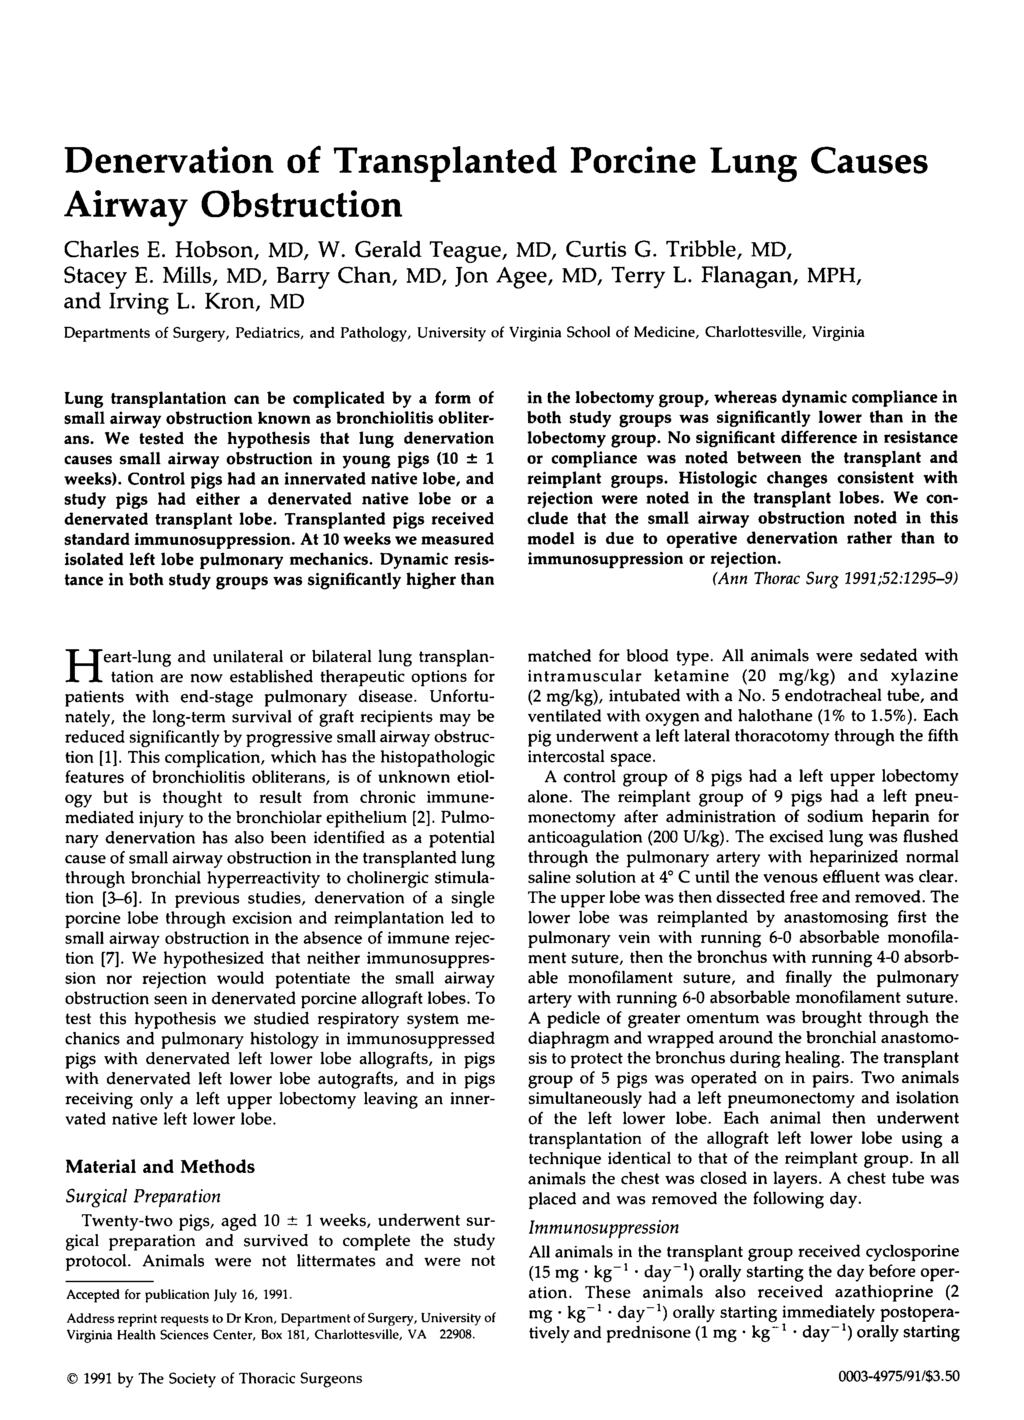 Denervation of Transplanted Porcine Lung Causes Airway Obstruction Charles E. Hobson, MD, W. Gerald Teague, MD, Curtis G. Tribble, MD, Stacey E. Mills, MD, Barry Chan, MD, Jon Agee, MD, Terry L.